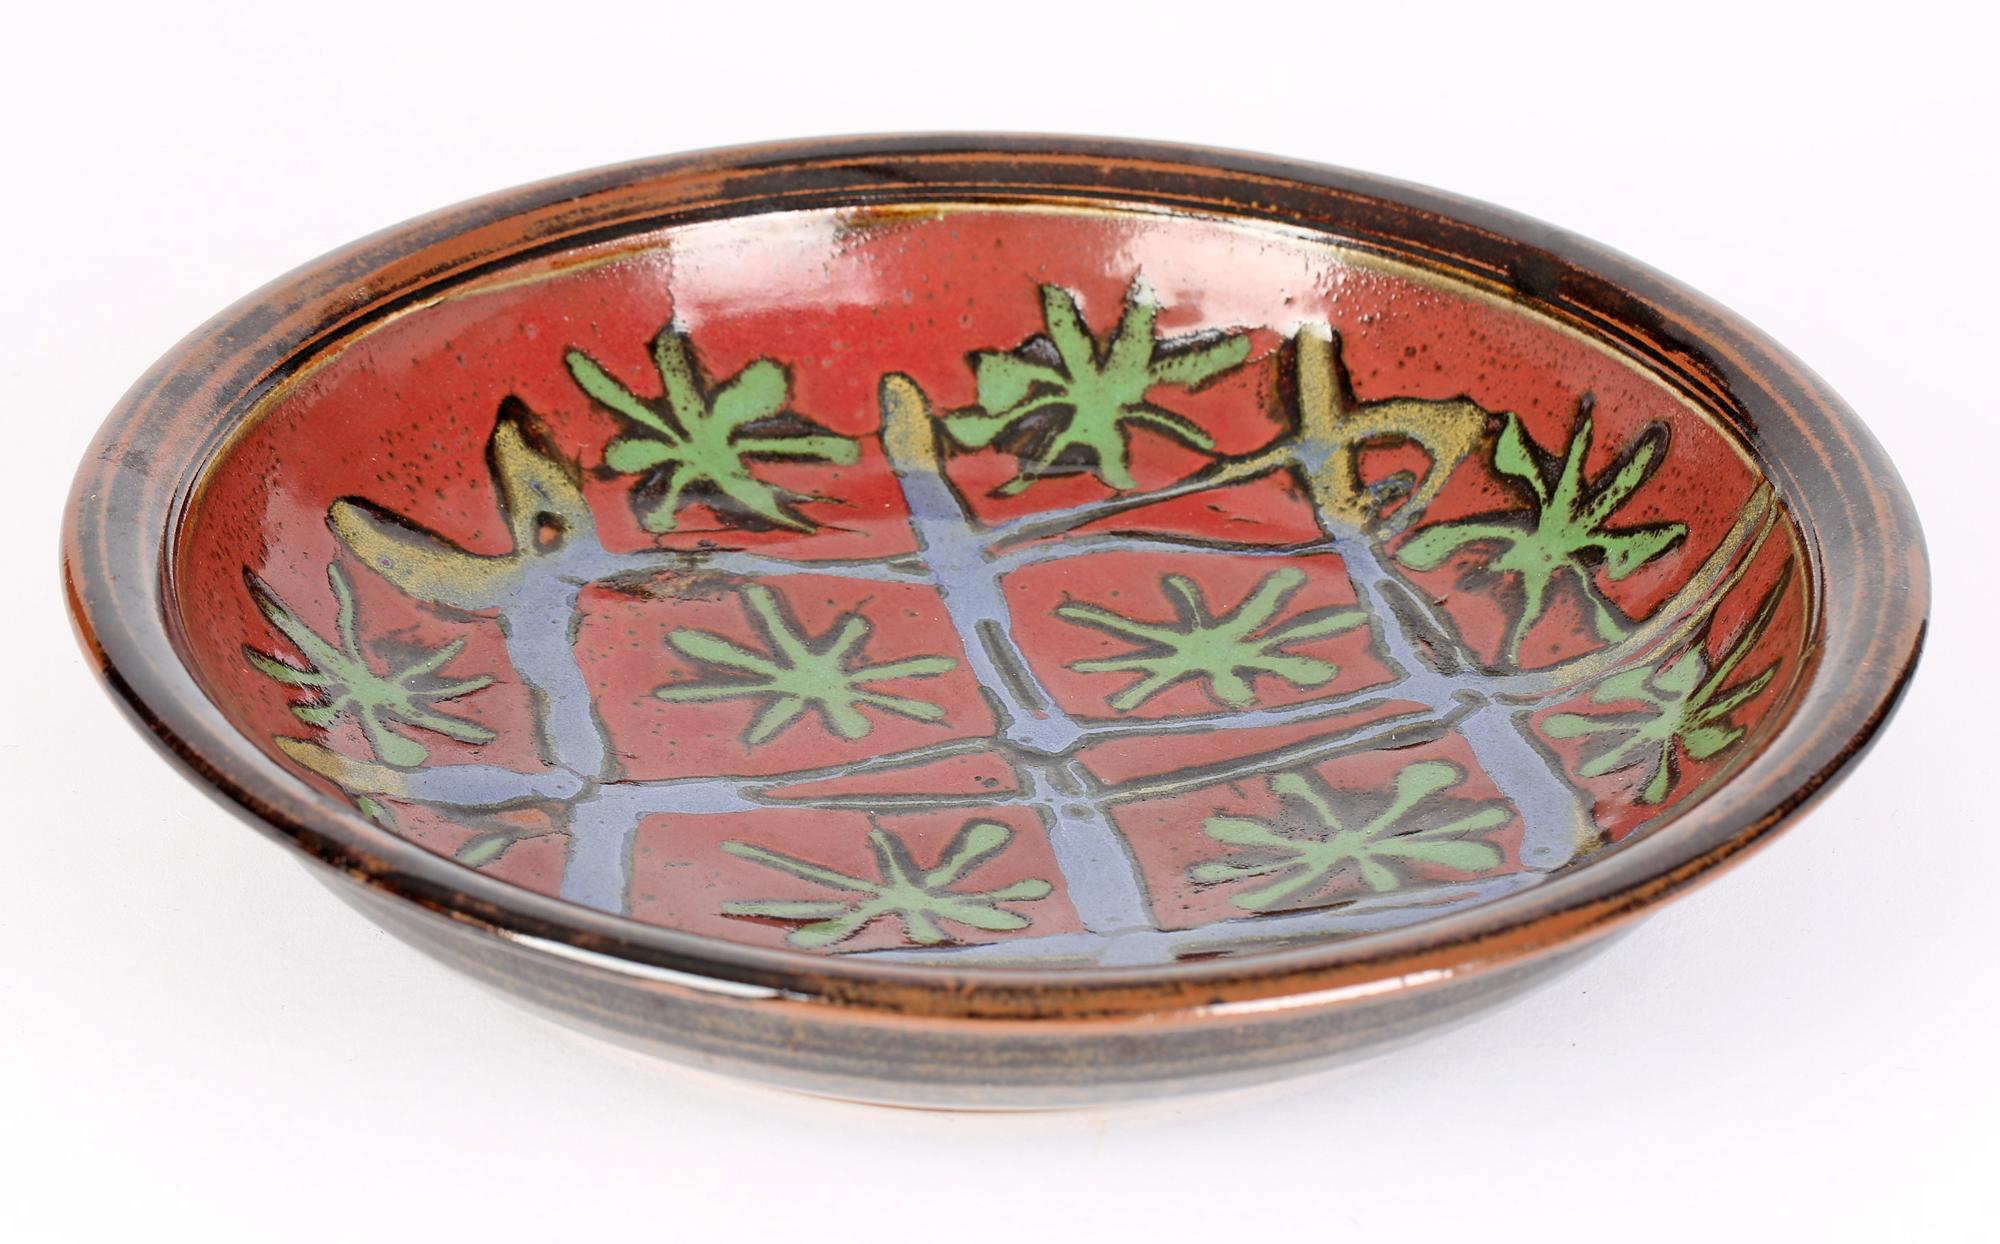 A very stylish English large studio pottery dish decorated with abstract floral and linear designs by David Melville dating from the 20th or early 21st century. The heavily potted stoneware hand thrown dish is of wide shallow rounded shape with a